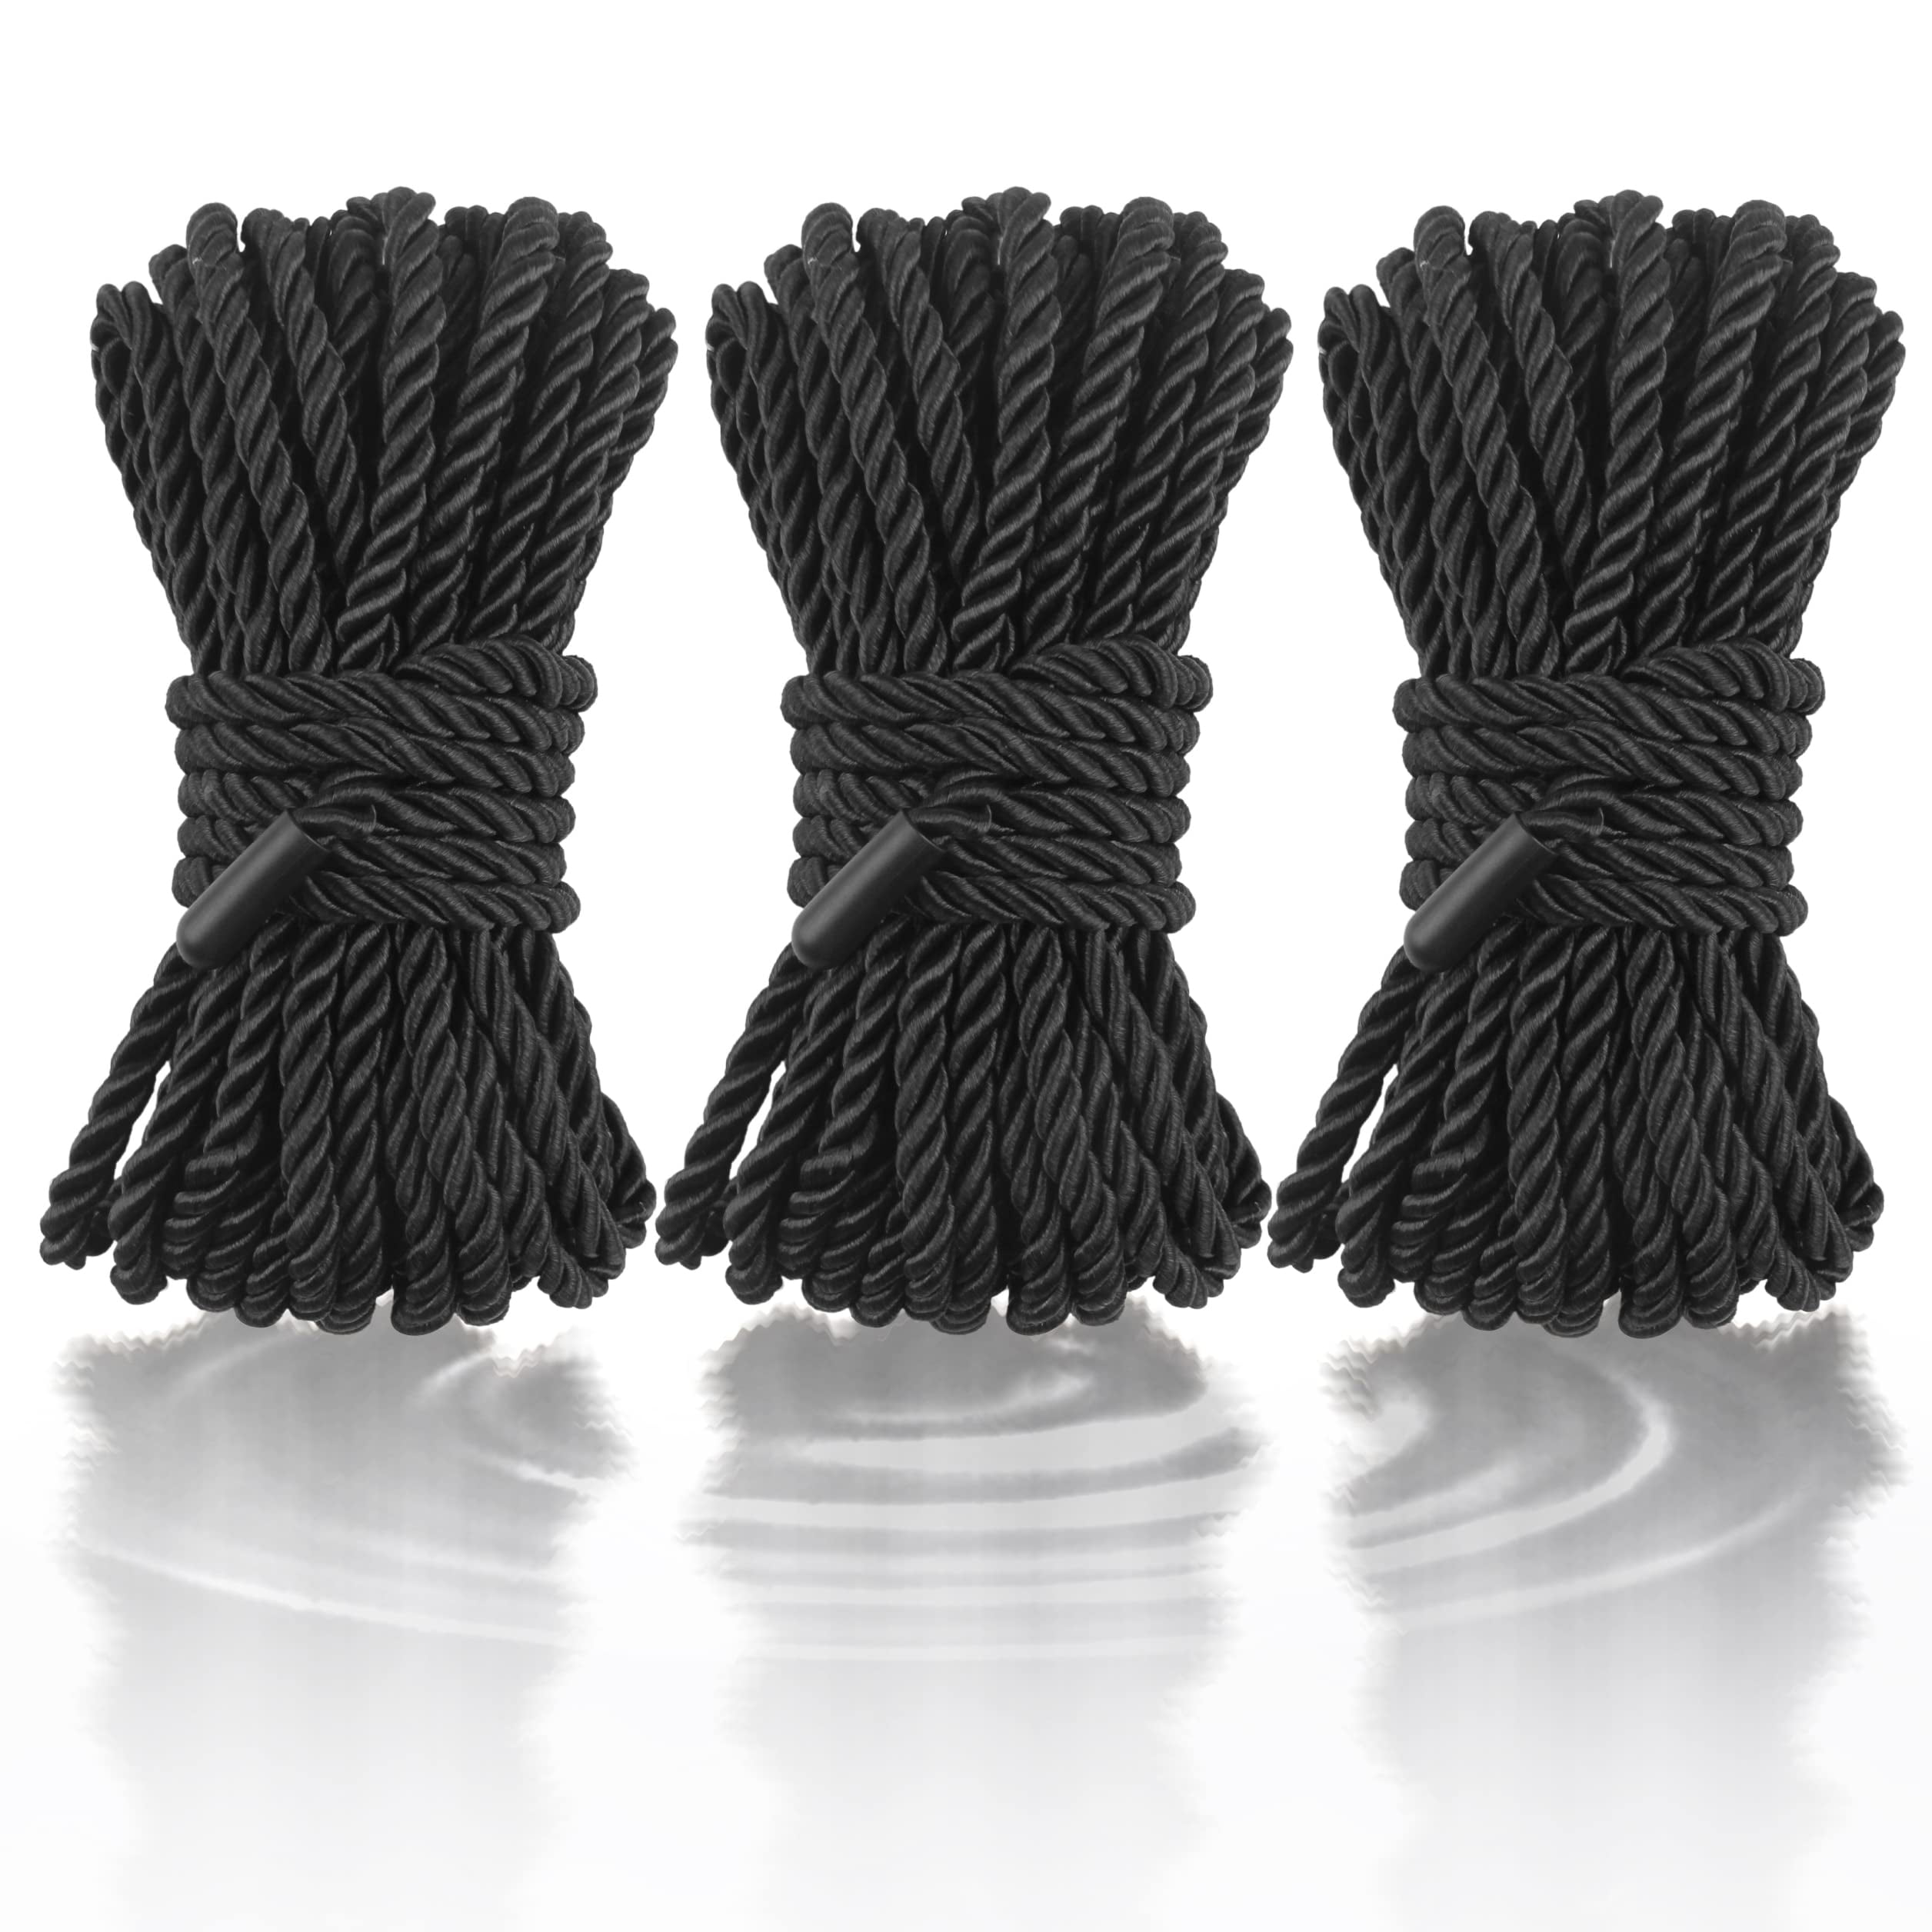 14mm Black Polypropylene Rope x 100 Metres Coil Poly Rope Coils 3 Strand Nylon 